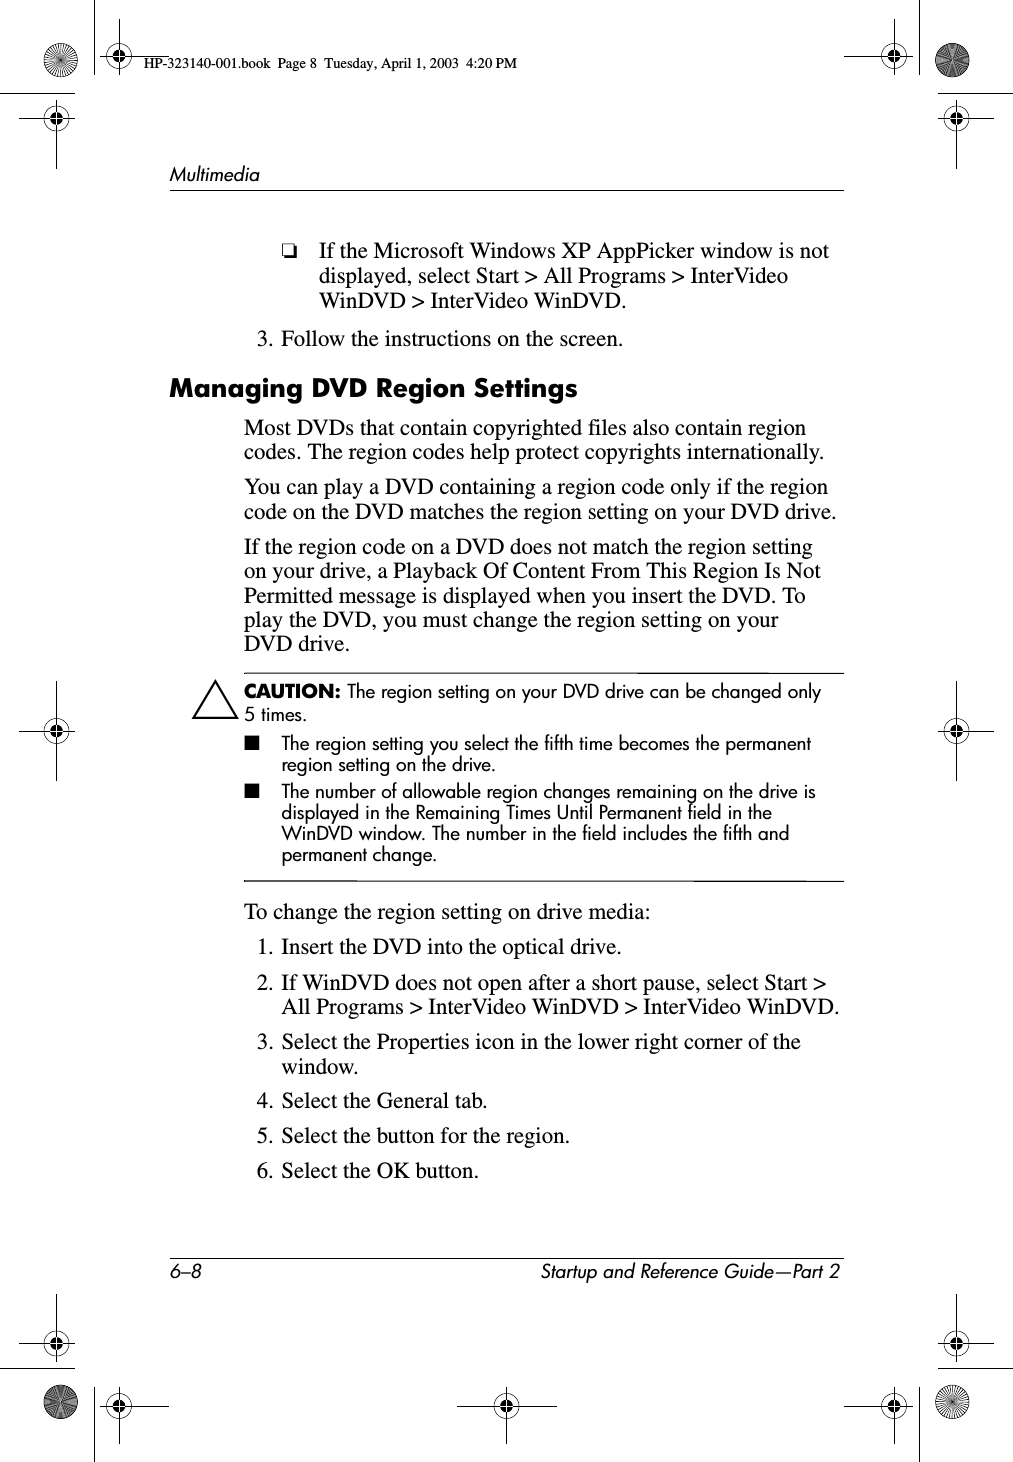 6–8 Startup and Reference Guide—Part 2Multimedia❏If the Microsoft Windows XP AppPicker window is not displayed, select Start &gt; All Programs &gt; InterVideo WinDVD &gt; InterVideo WinDVD.3. Follow the instructions on the screen.Managing DVD Region SettingsMost DVDs that contain copyrighted files also contain region codes. The region codes help protect copyrights internationally.You can play a DVD containing a region code only if the region code on the DVD matches the region setting on your DVD drive.If the region code on a DVD does not match the region setting on your drive, a Playback Of Content From This Region Is Not Permitted message is displayed when you insert the DVD. To play the DVD, you must change the region setting on your DVD drive.ÄCAUTION: The region setting on your DVD drive can be changed only 5times.■The region setting you select the fifth time becomes the permanent region setting on the drive.■The number of allowable region changes remaining on the drive is displayed in the Remaining Times Until Permanent field in the WinDVD window. The number in the field includes the fifth and permanent change.To change the region setting on drive media:1. Insert the DVD into the optical drive.2. If WinDVD does not open after a short pause, select Start &gt; All Programs &gt; InterVideo WinDVD &gt; InterVideo WinDVD.3. Select the Properties icon in the lower right corner of the window.4. Select the General tab.5. Select the button for the region.6. Select the OK button.HP-323140-001.book  Page 8  Tuesday, April 1, 2003  4:20 PM